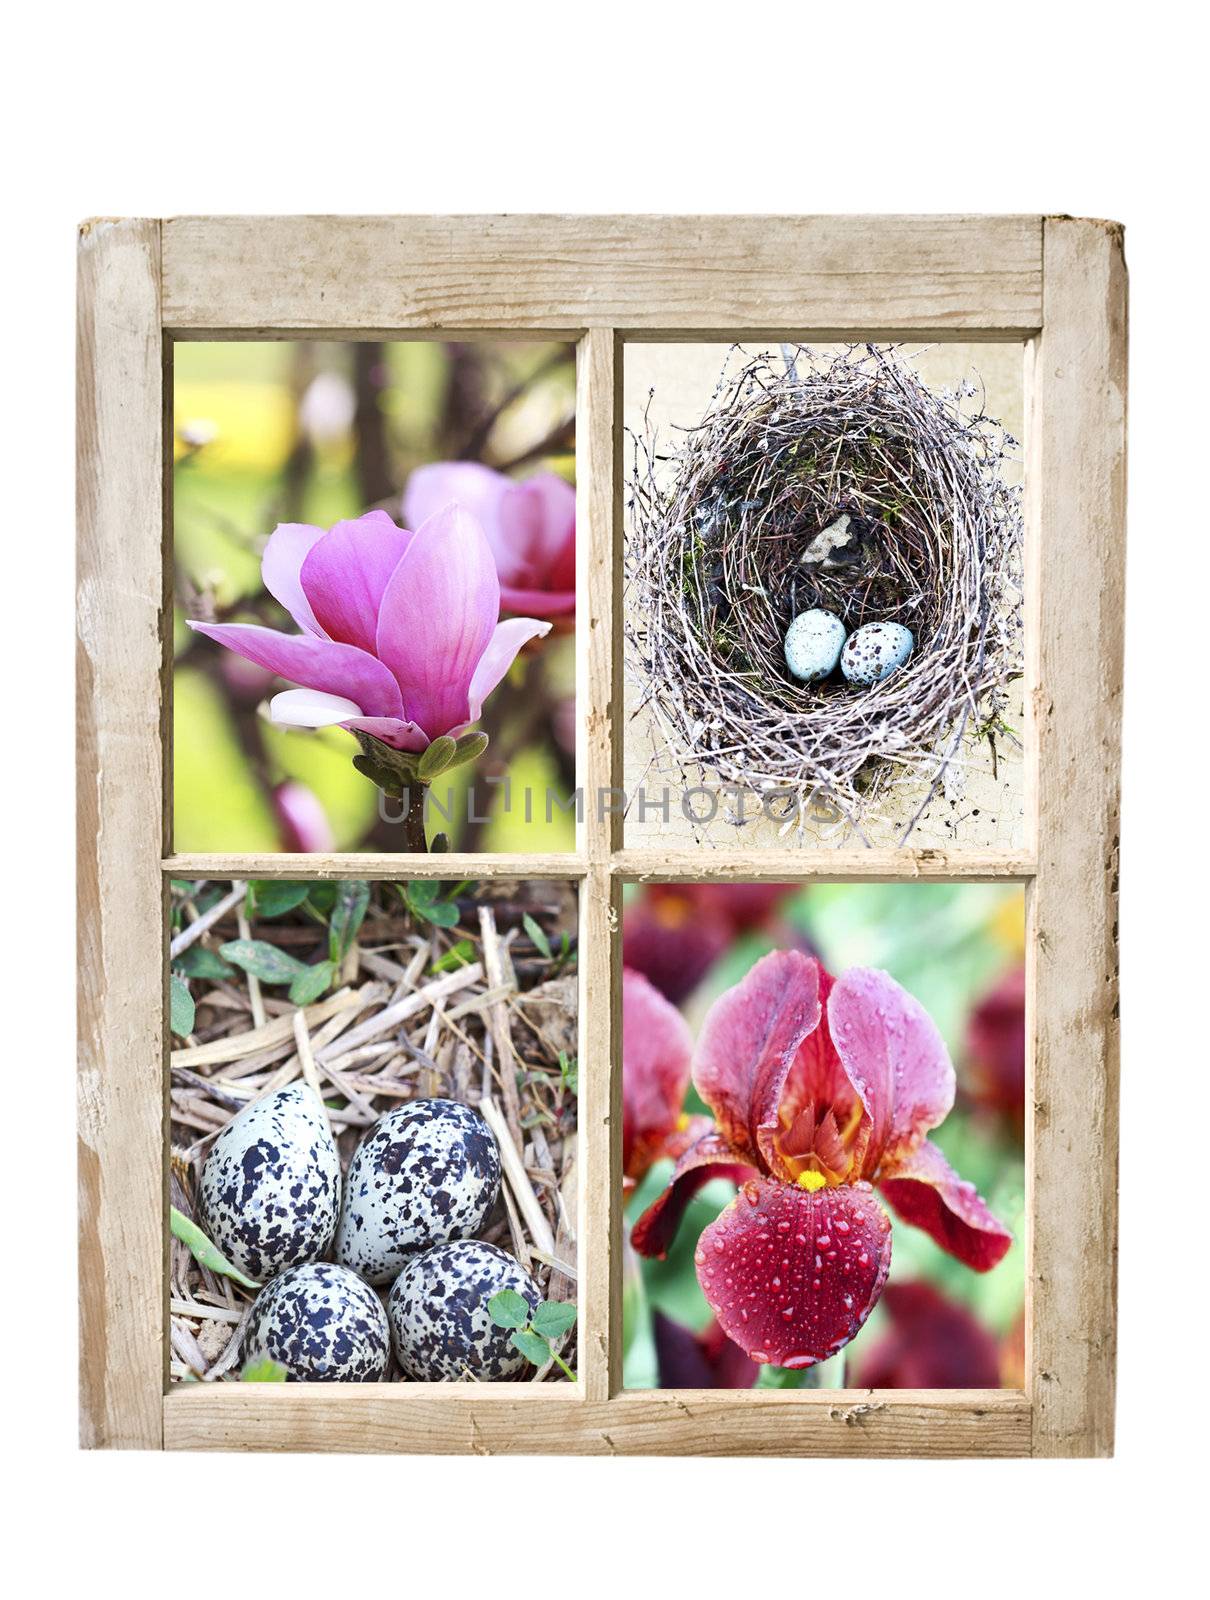 Images of spring in an old antique wooden window frame.